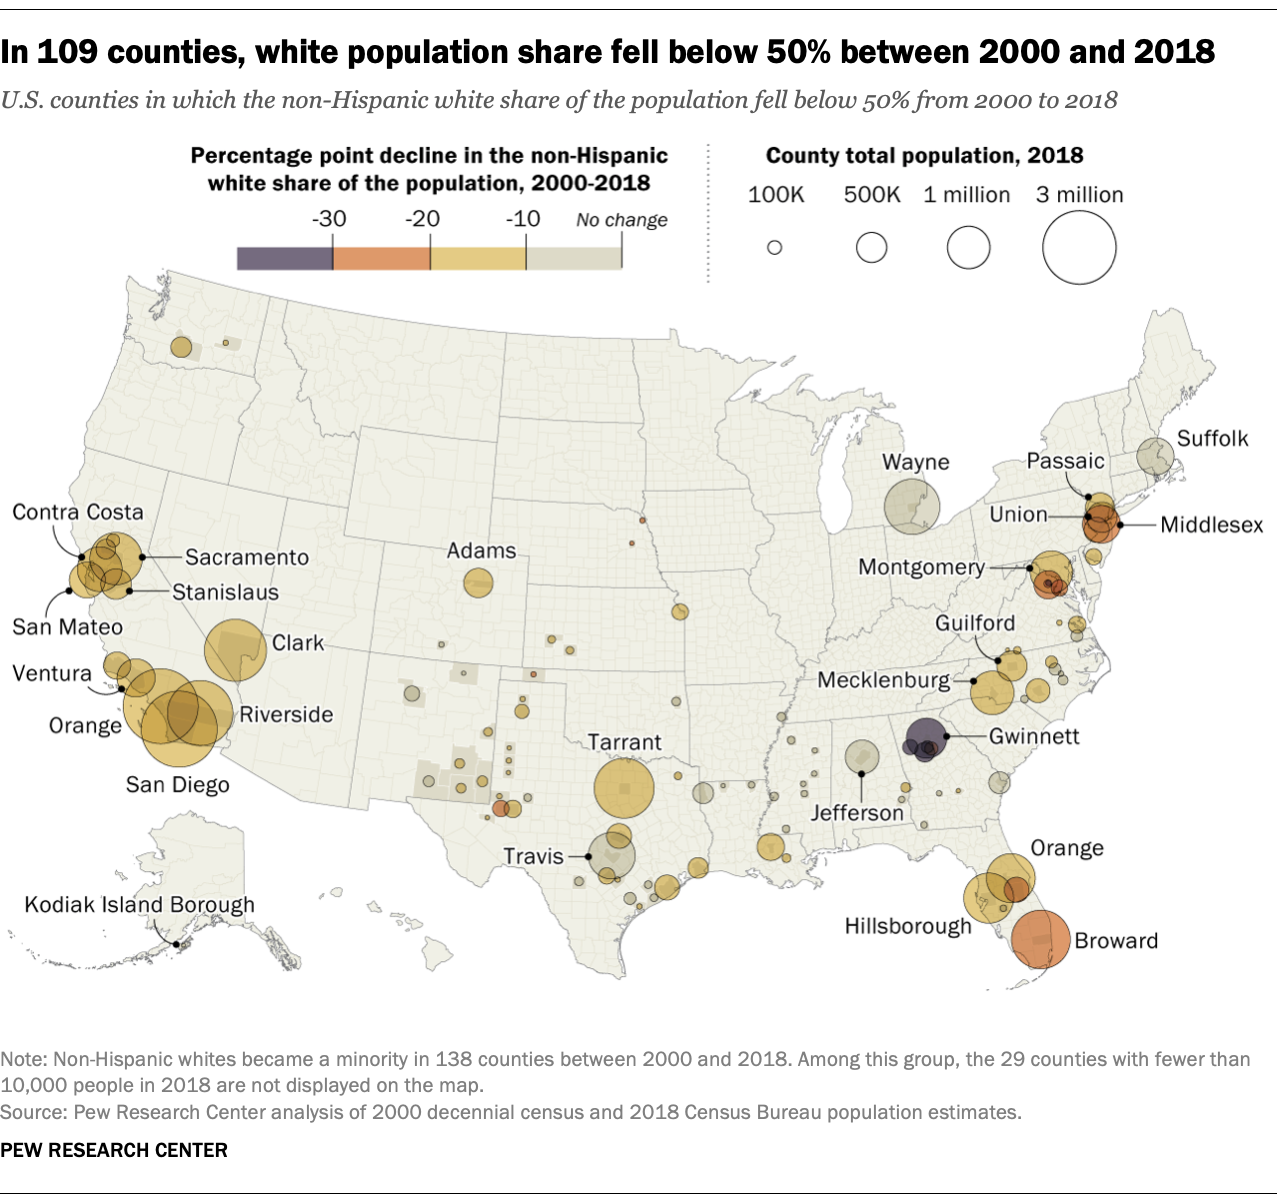 In 109 counties, white population share fell below 50% between 2000 and 2018